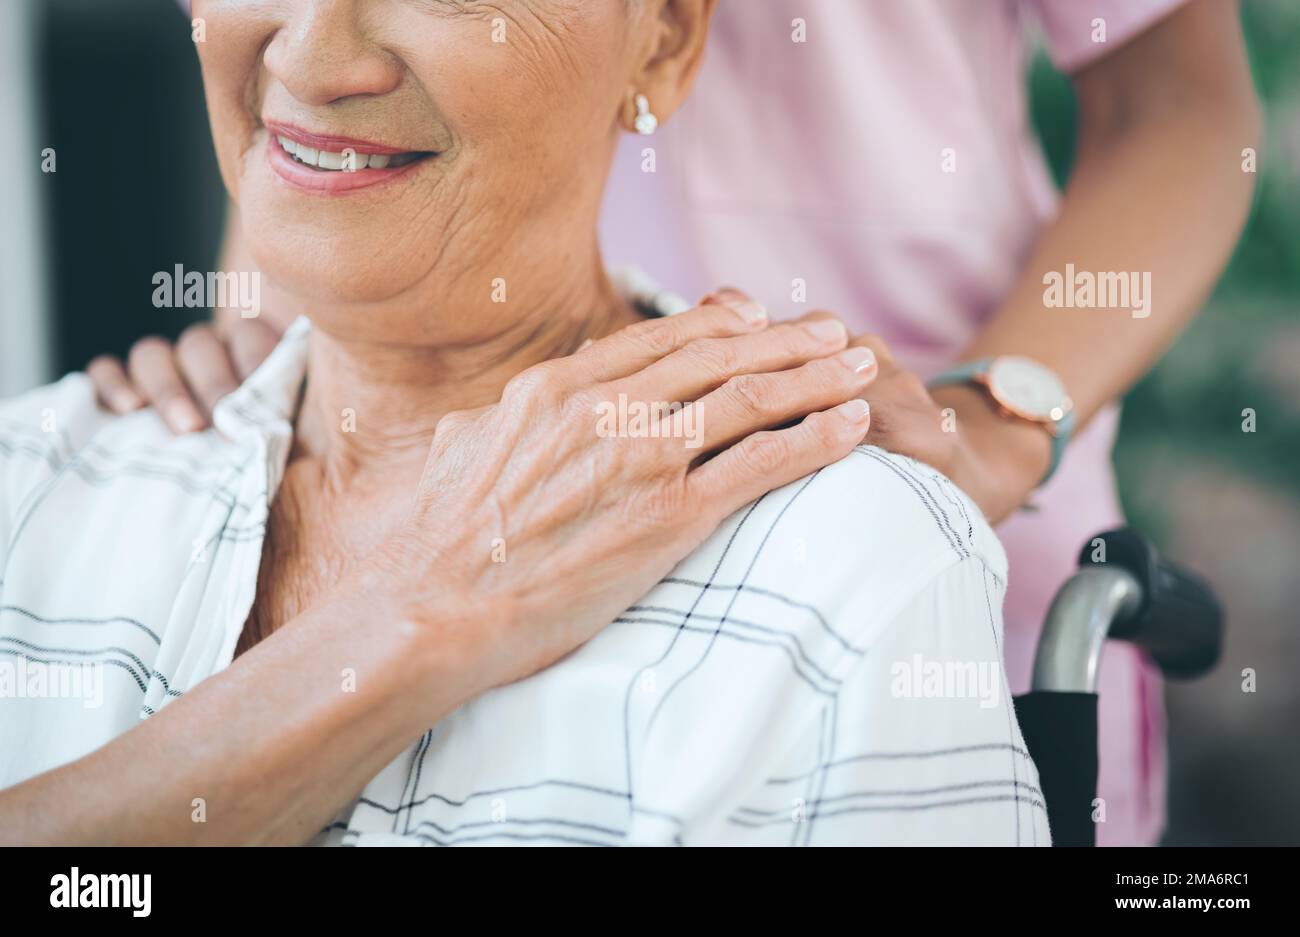 Hold on, for all the sunshine of our past. a nurse caring for an older woman in a wheelchair. Stock Photo